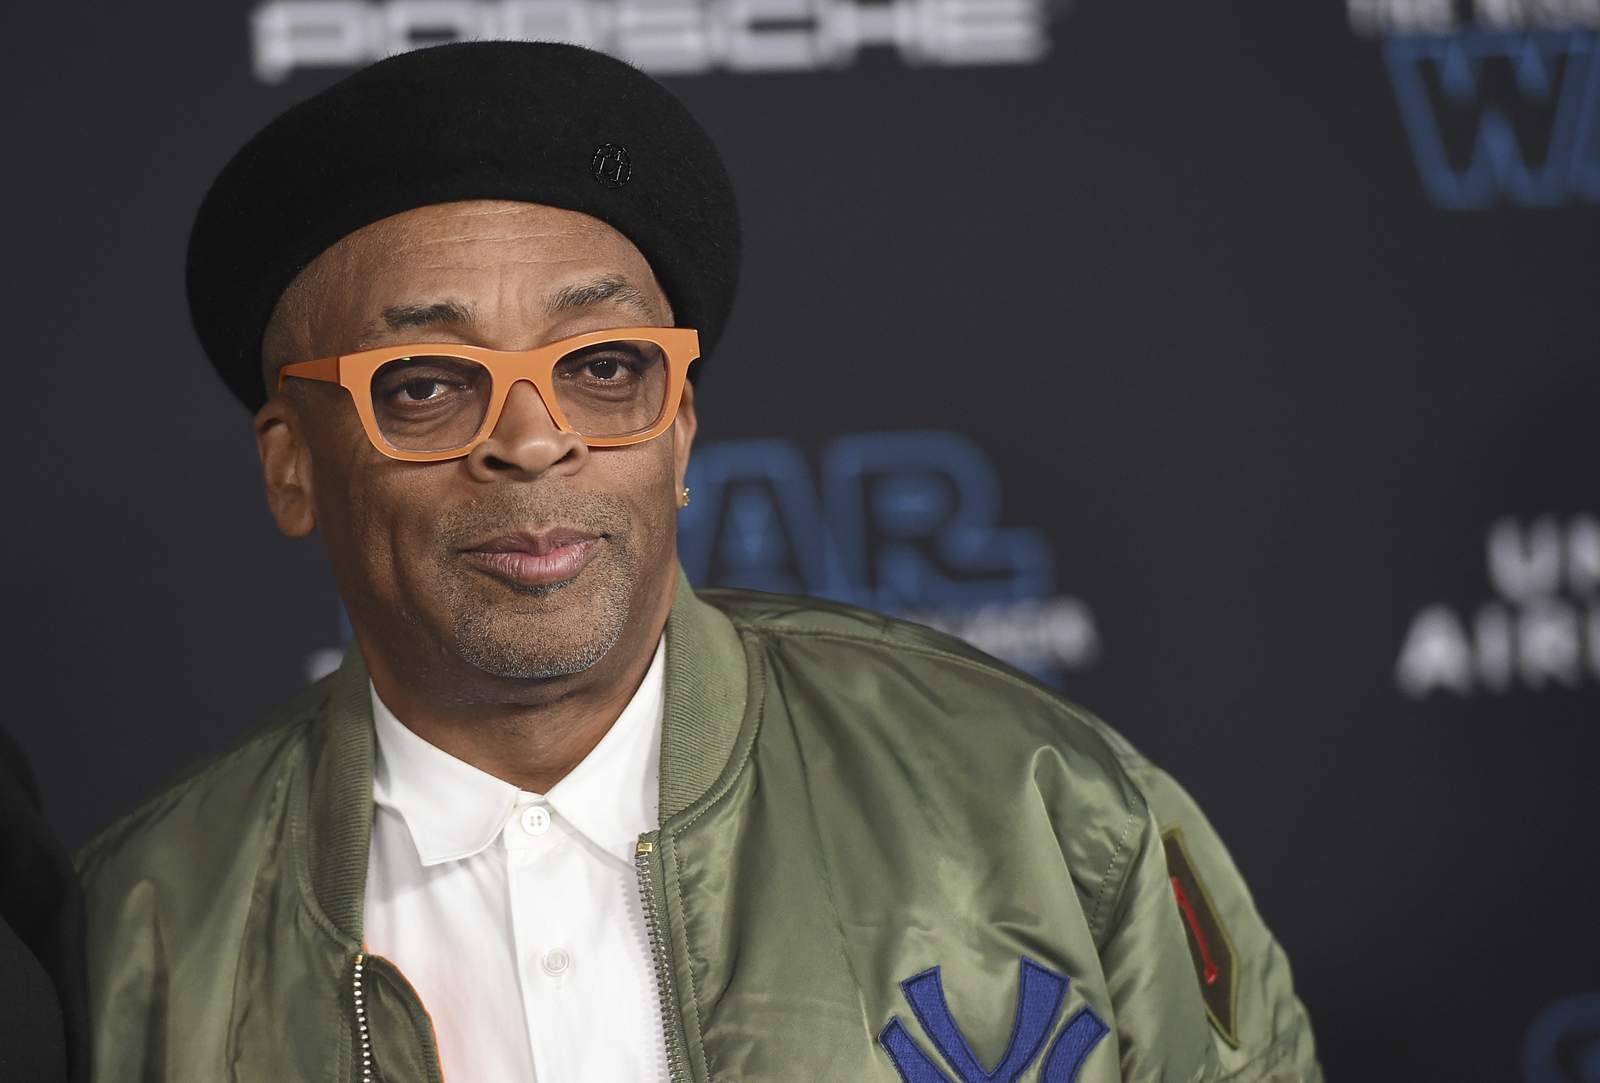 AFI offers free 'Do The Right Thing' and talk with Spike Lee